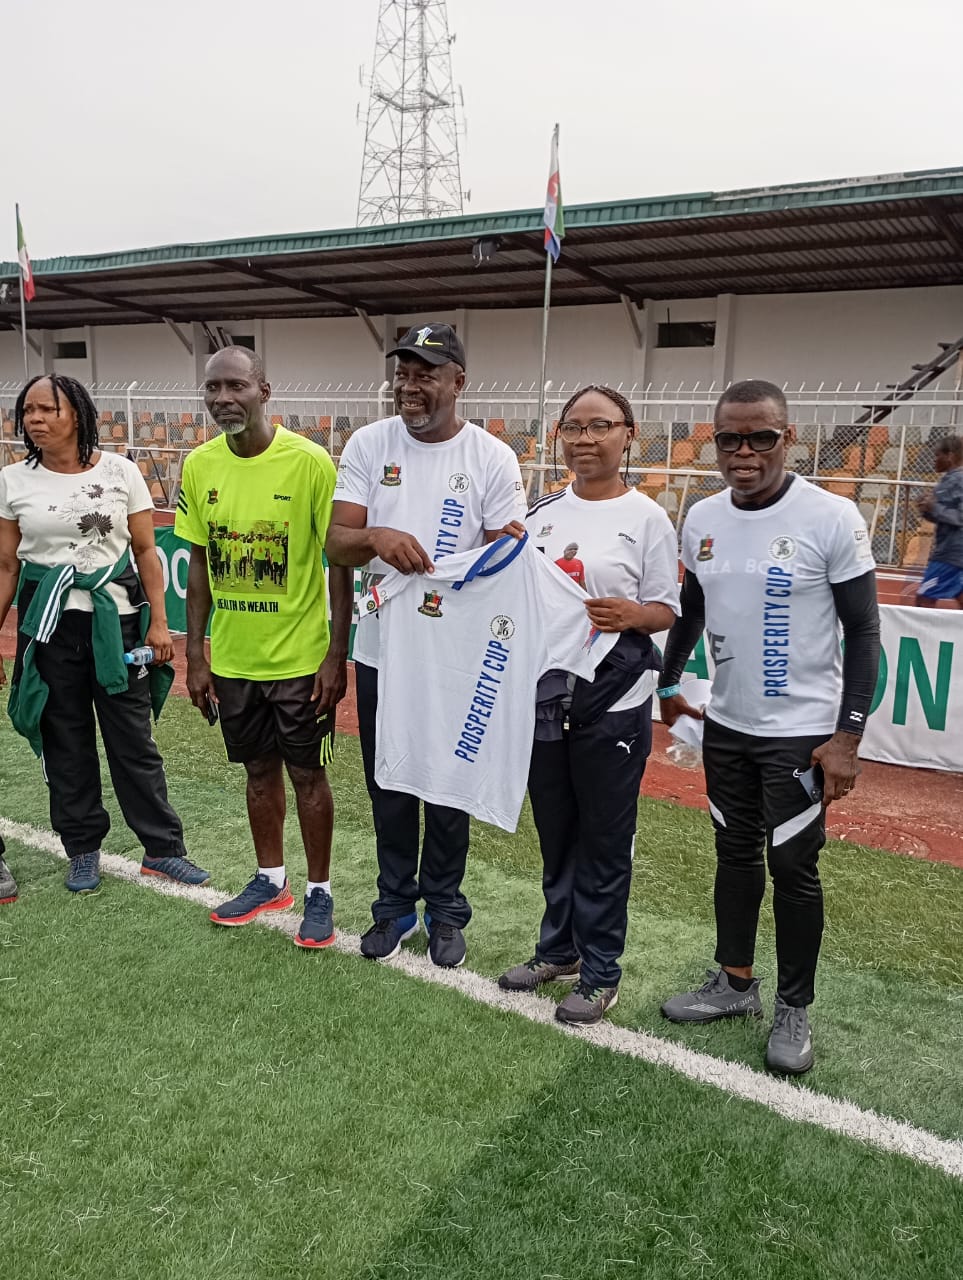 Bayelsa Head of Service, Permanent Secretary, Ministry of Youth and Sports Development and Director of Sports Receive Prosperity Cup Season Six Branded Jerseys